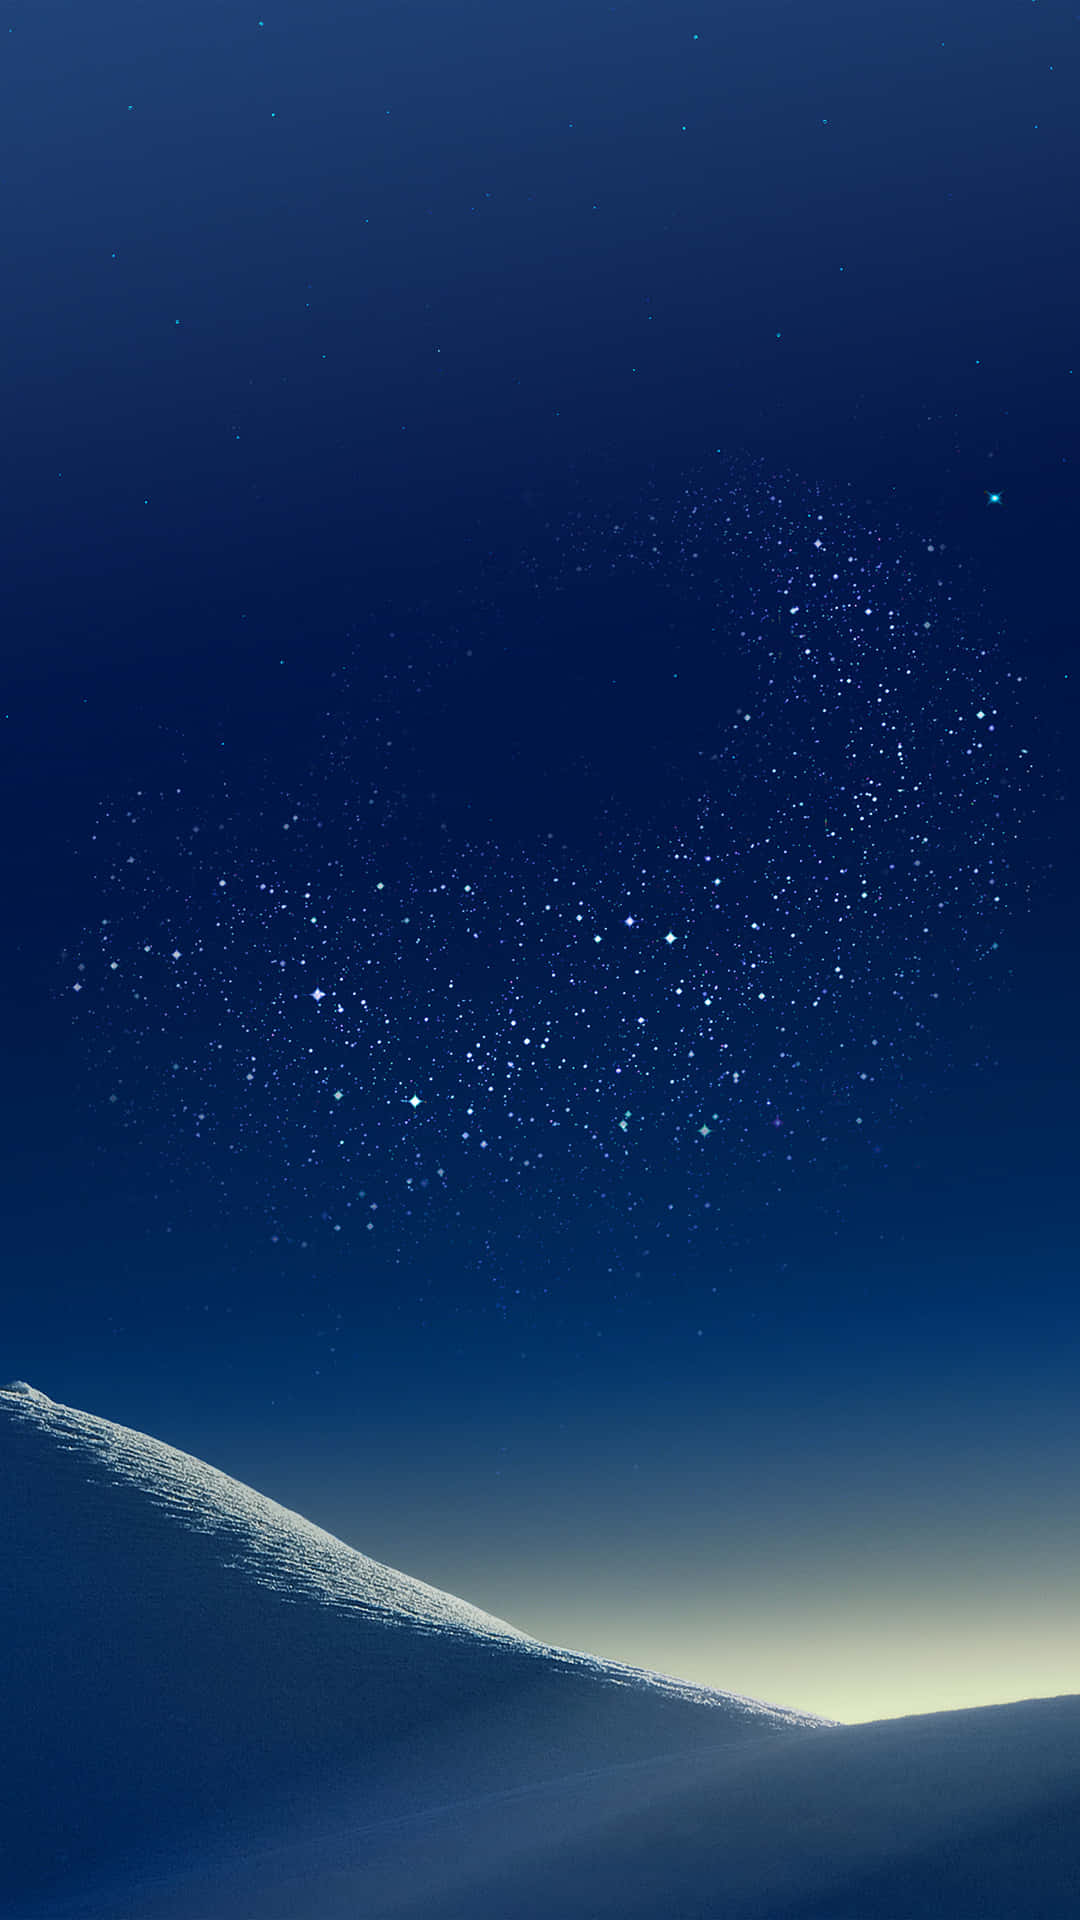 Get ready to explore the enchanting universe with a Blue Galaxy Iphone Wallpaper